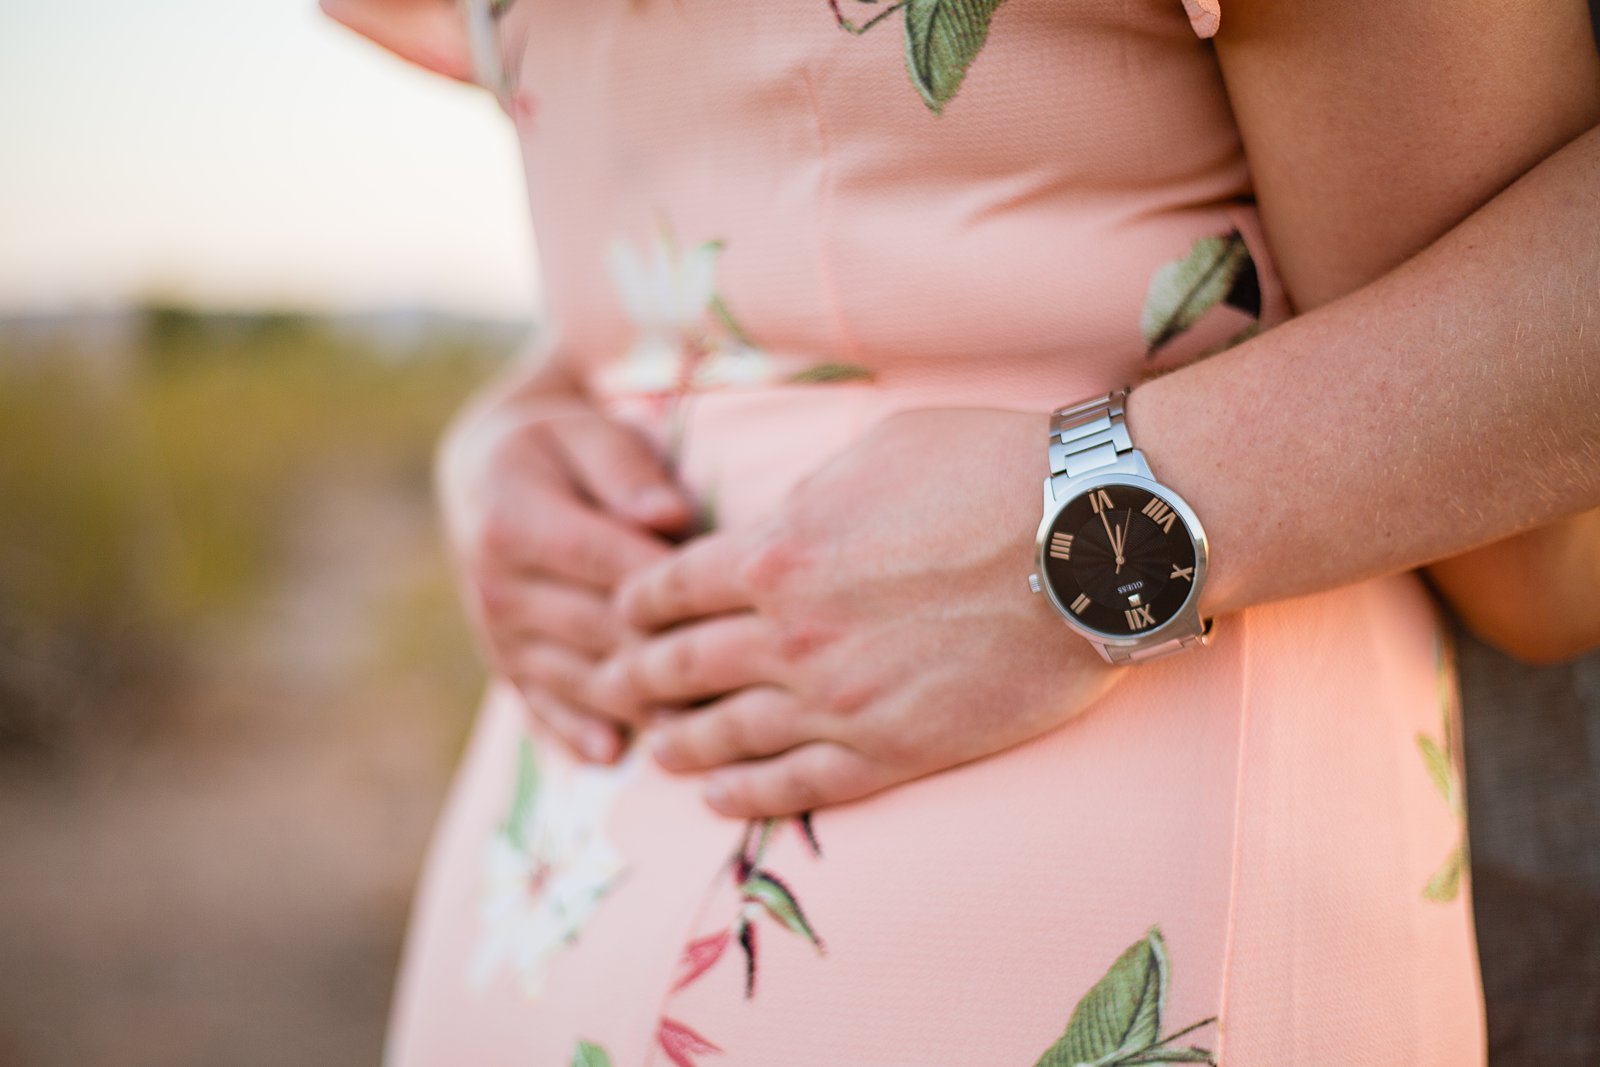 Detail image of groom's watch while holding bride's waist during their engagement session by PMA Photography.